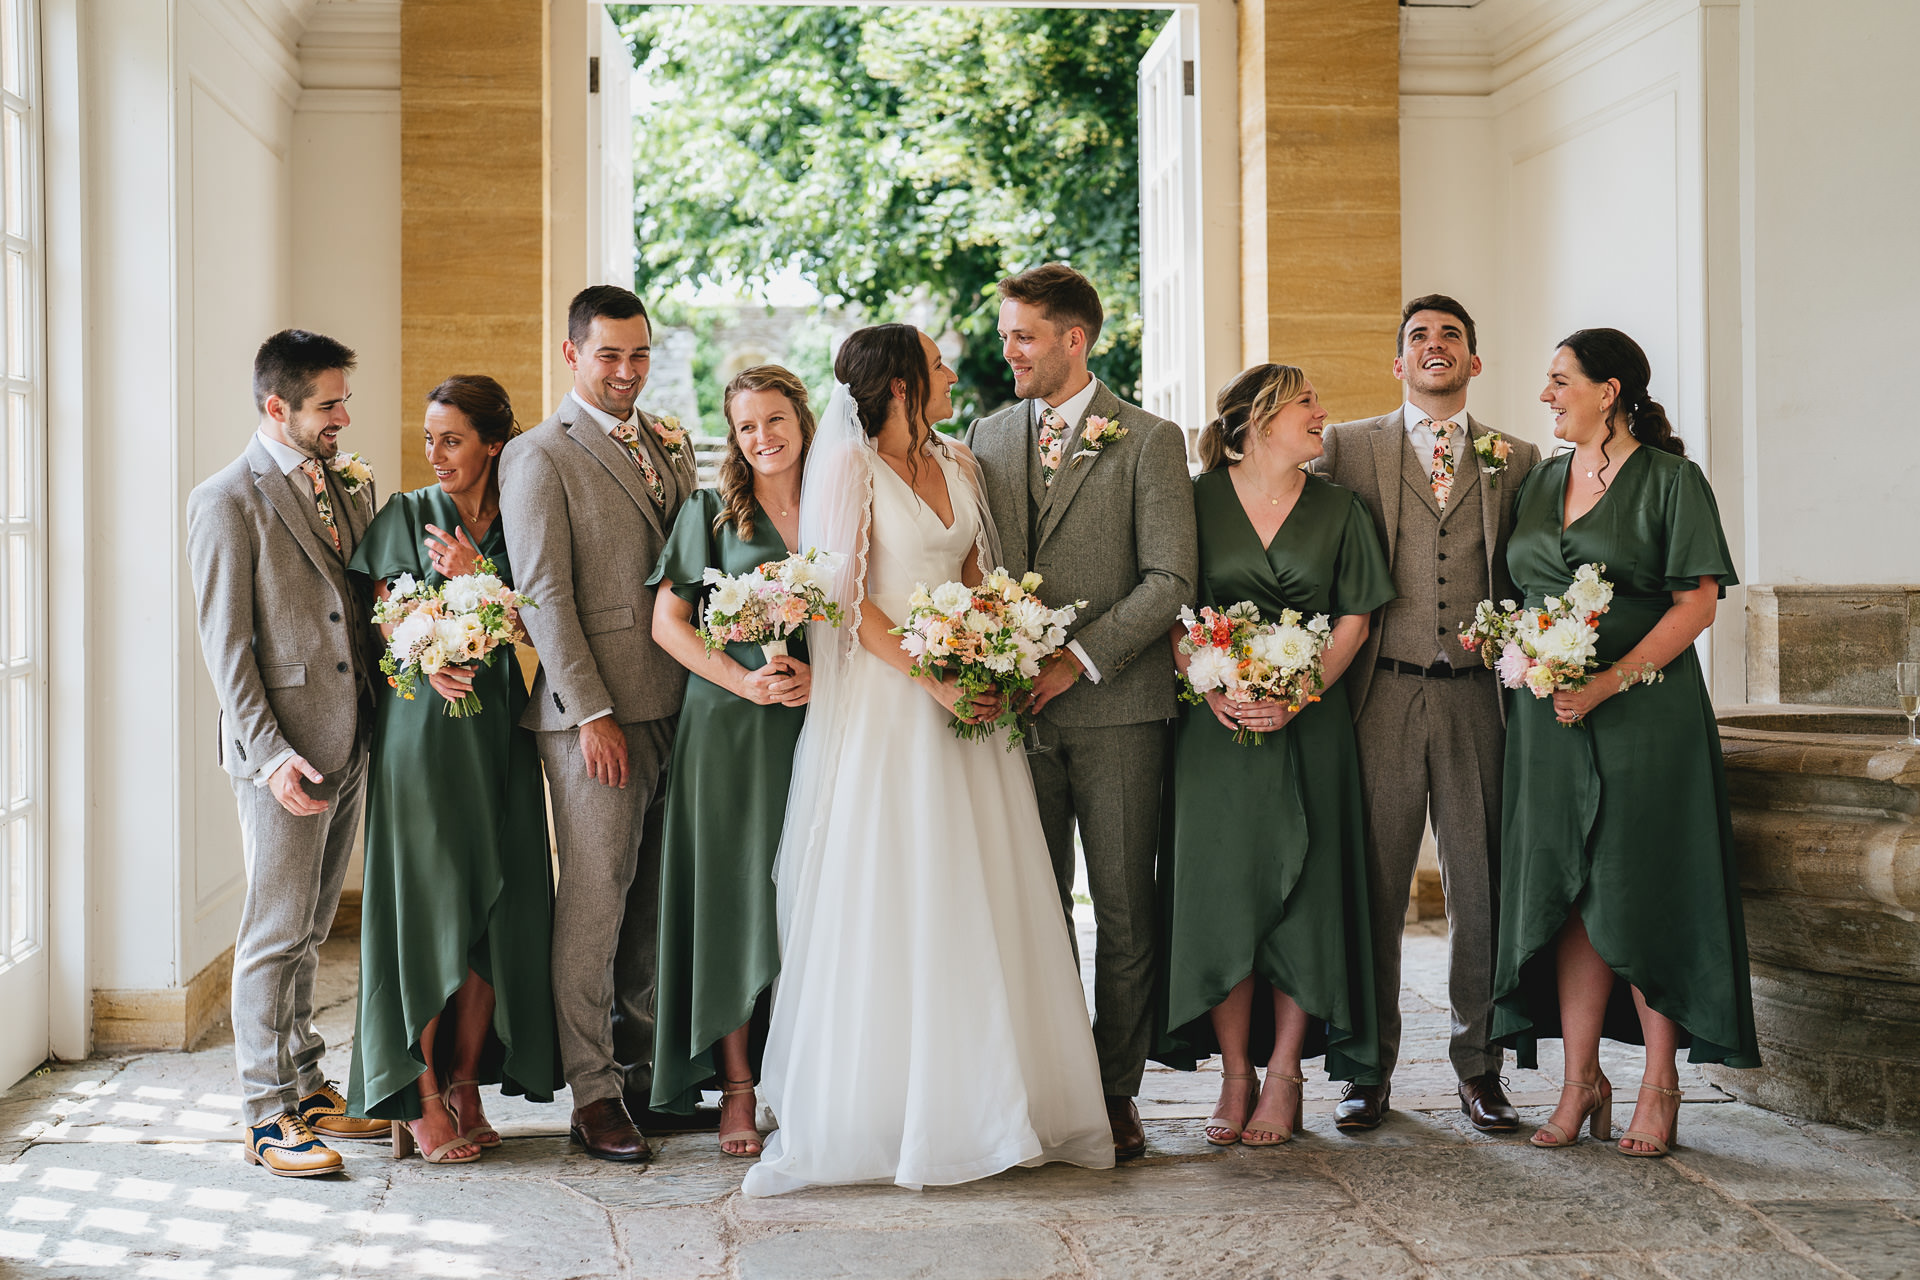 A wedding group photo in the orangery at Hestercombe Gardens in Somerset